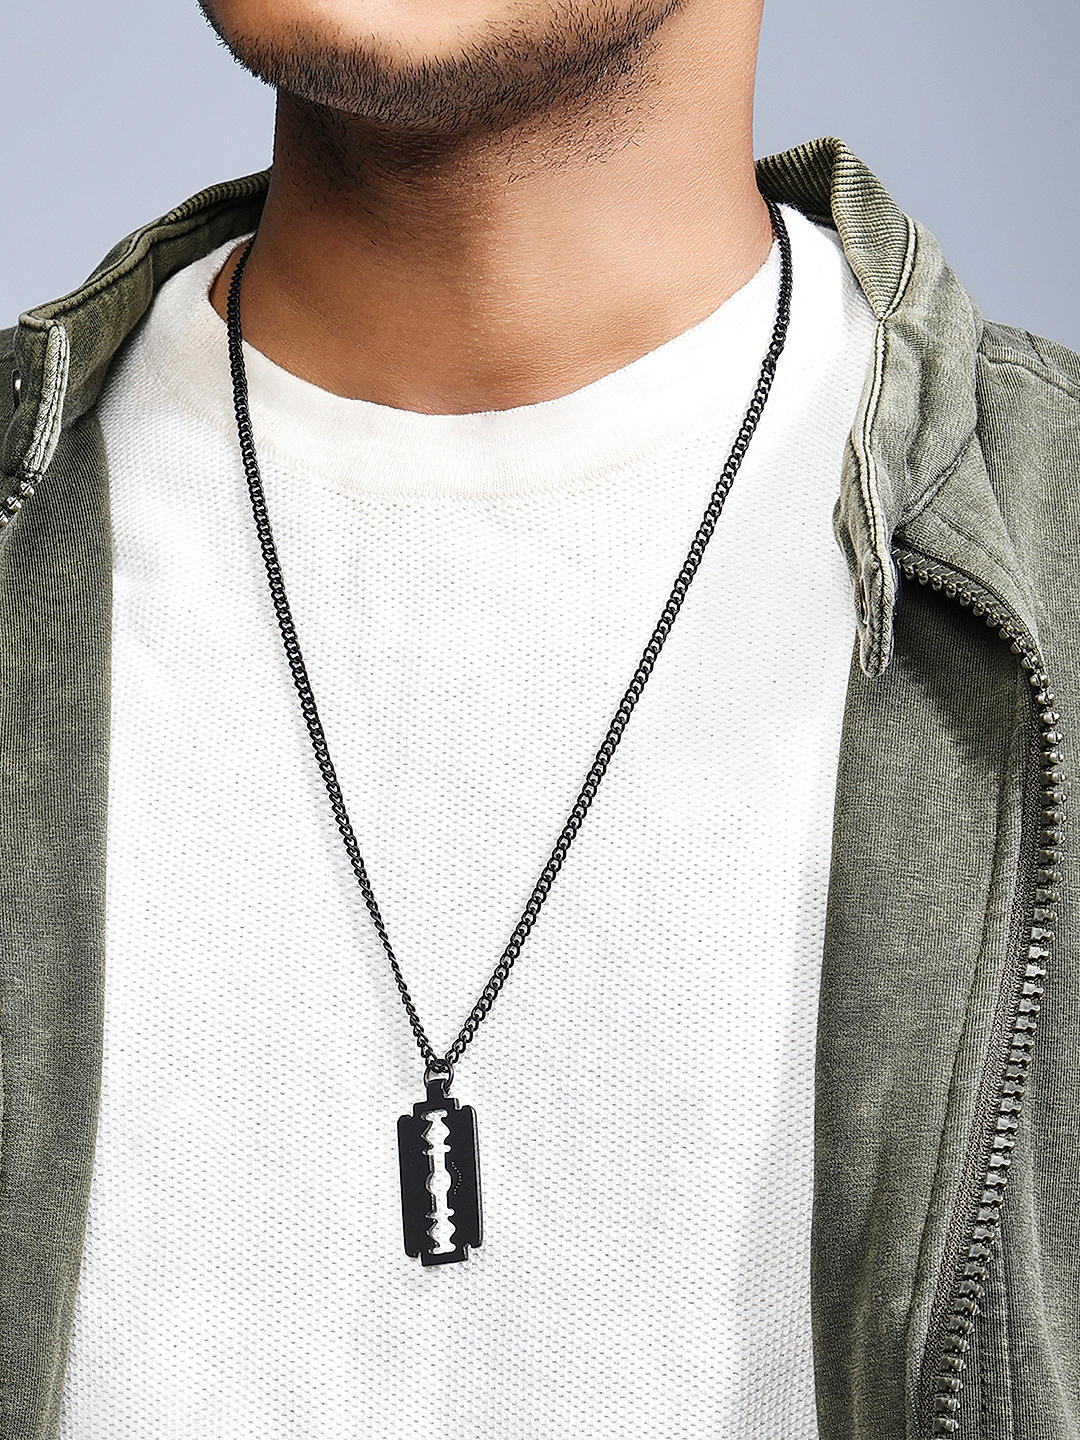 Buy Men's Black Chain Necklace Thick Box Chain Necklace 3.5mm Waterproof  Chain Stainless Steel Chain Black Jewelry by Modern Out Online in India -  Etsy